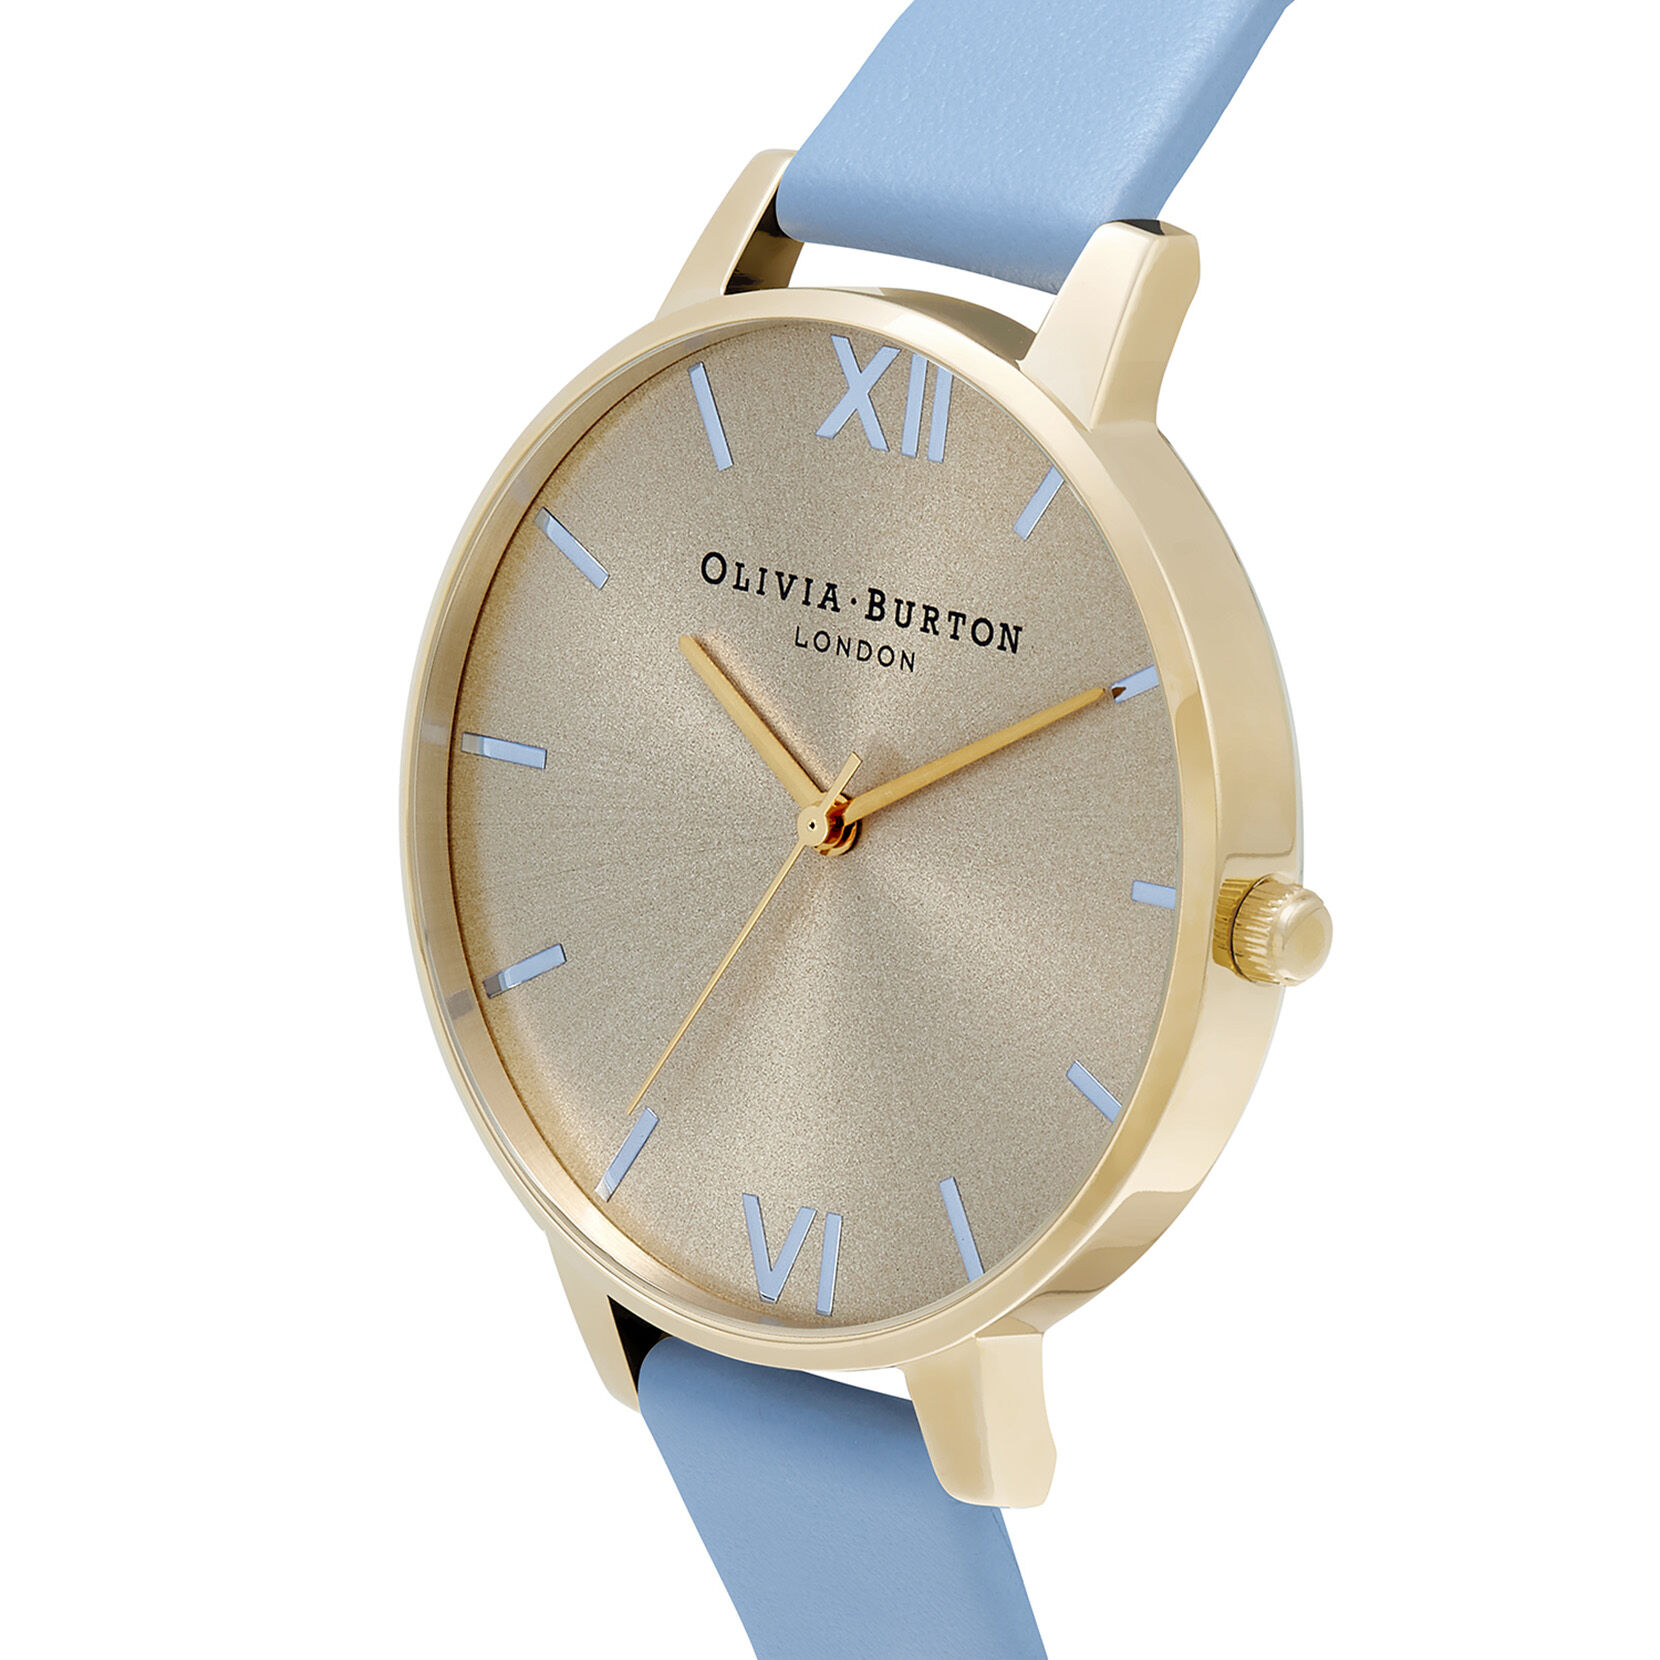 The England Big Dial Pale Gold, Silver & Chalk Blue Watch